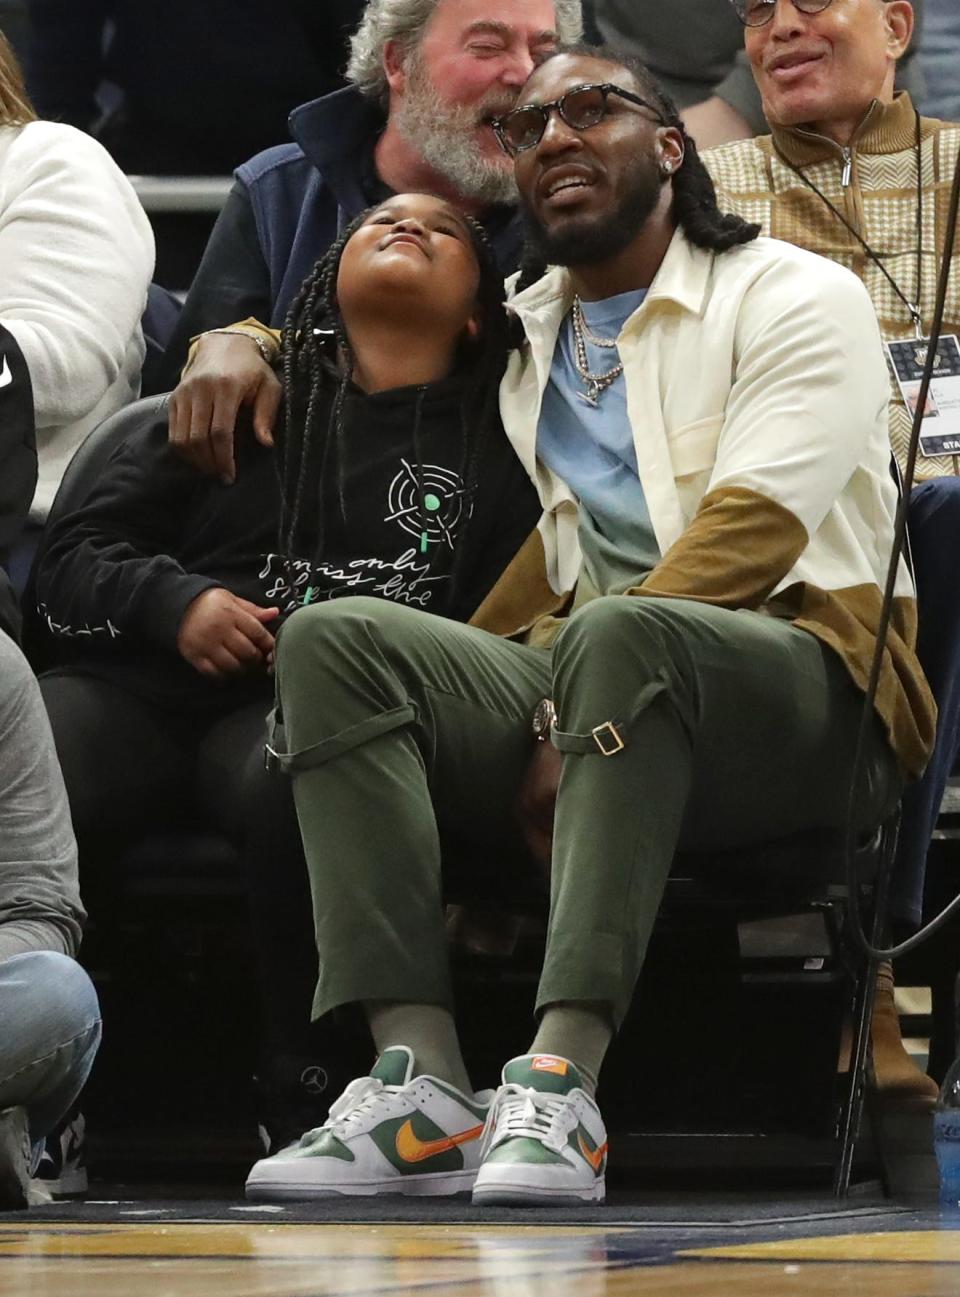 Former Marquette basketball star and current Phoenix Suns player Jae Crowder is shown during the first half of the Marquette-St.  John's game on Saturday, March 5, 2022 at the Fiserv Forum in Milwaukee.  Crowder has not played this season.